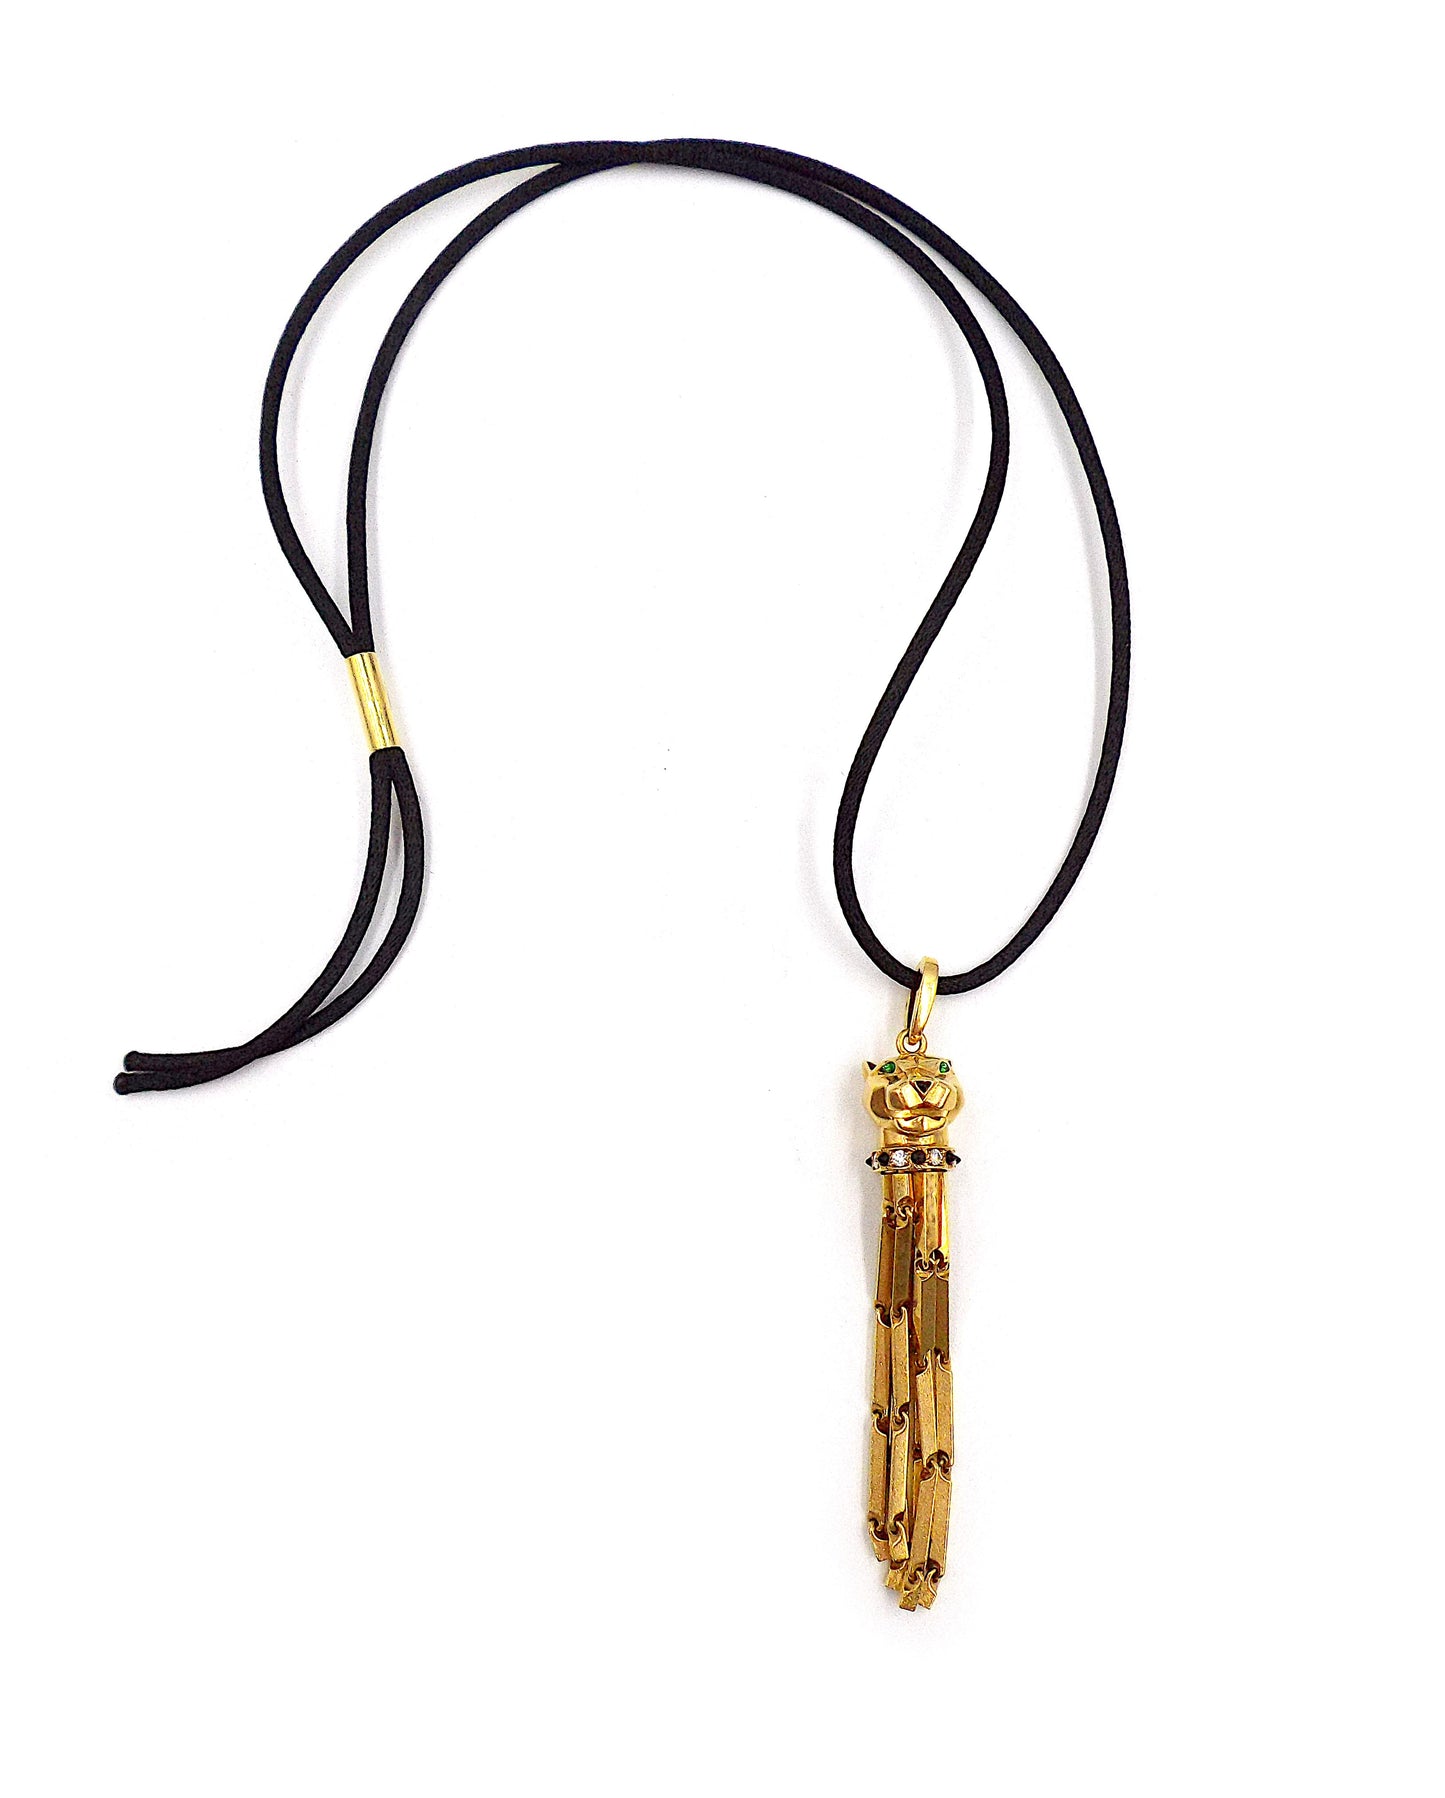 Cartier Panthere 18K Yellow Gold Pendant Necklace with a Black Cord